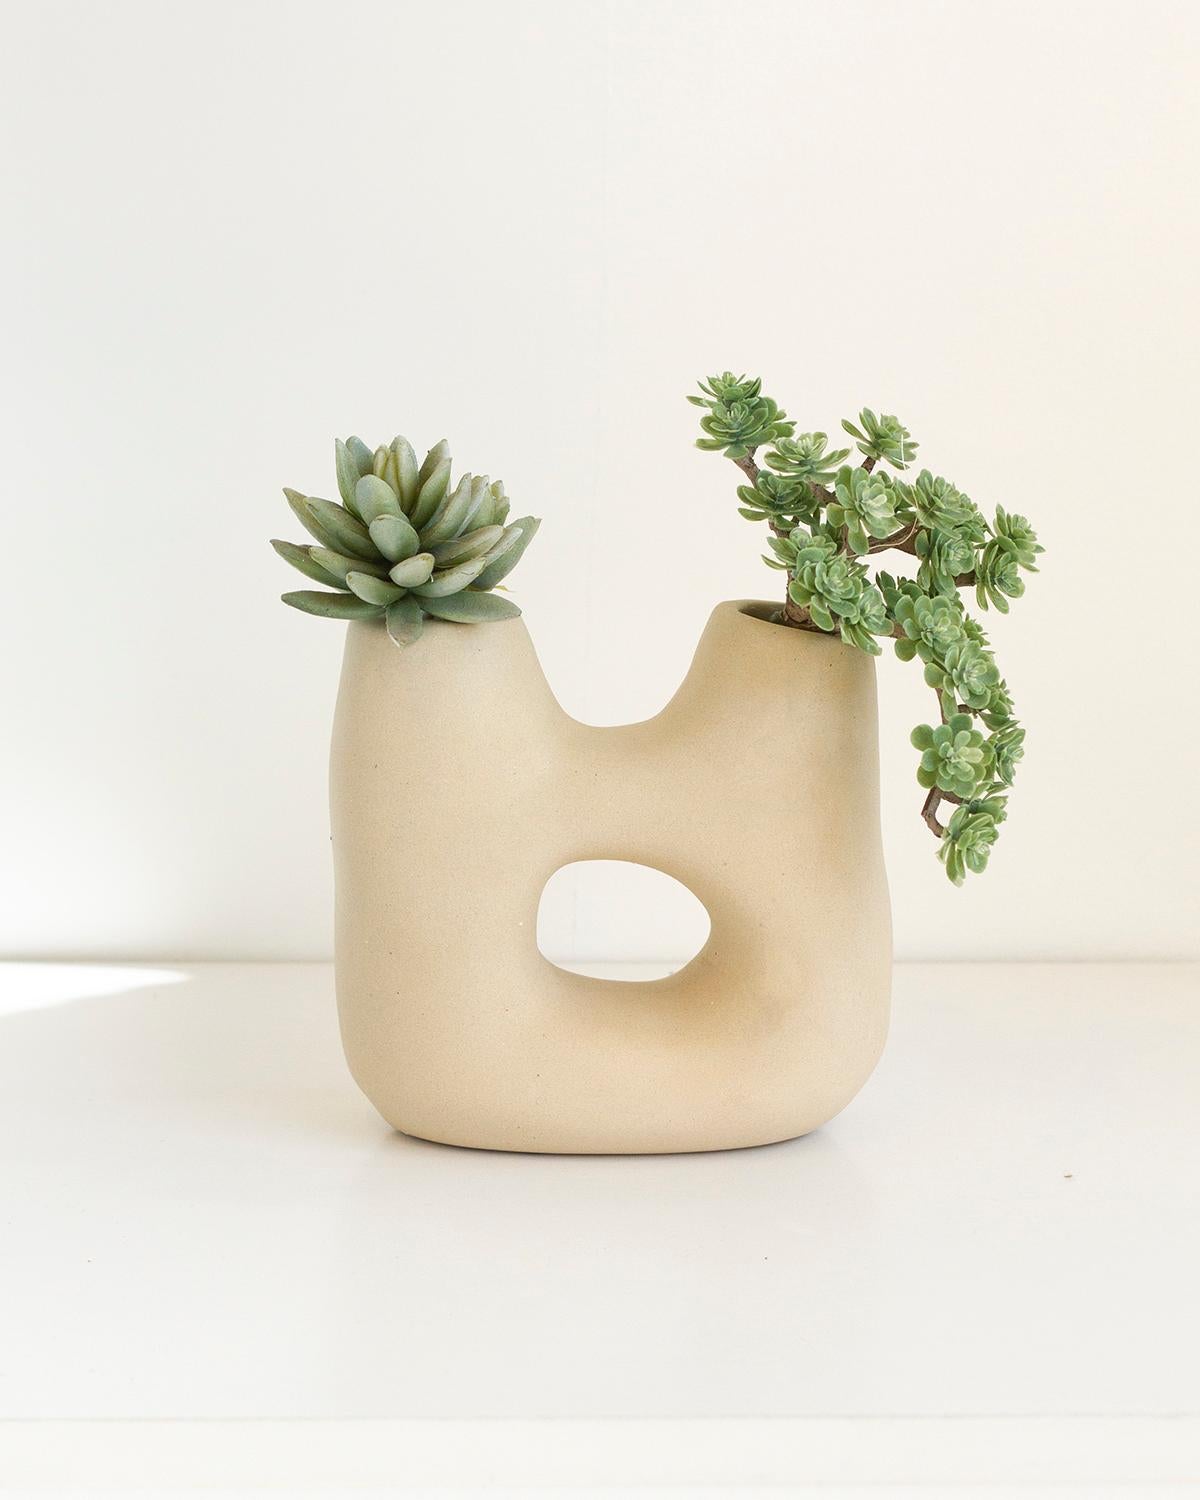 This organic modern Dual Clay Vase is the perfect holiday gift, featuring two openings and crafted from sturdy and elegant beige clay. Its quiet luxury is perfect for the minimalist home. Handmade with care, it exudes elegance.

Only one of each